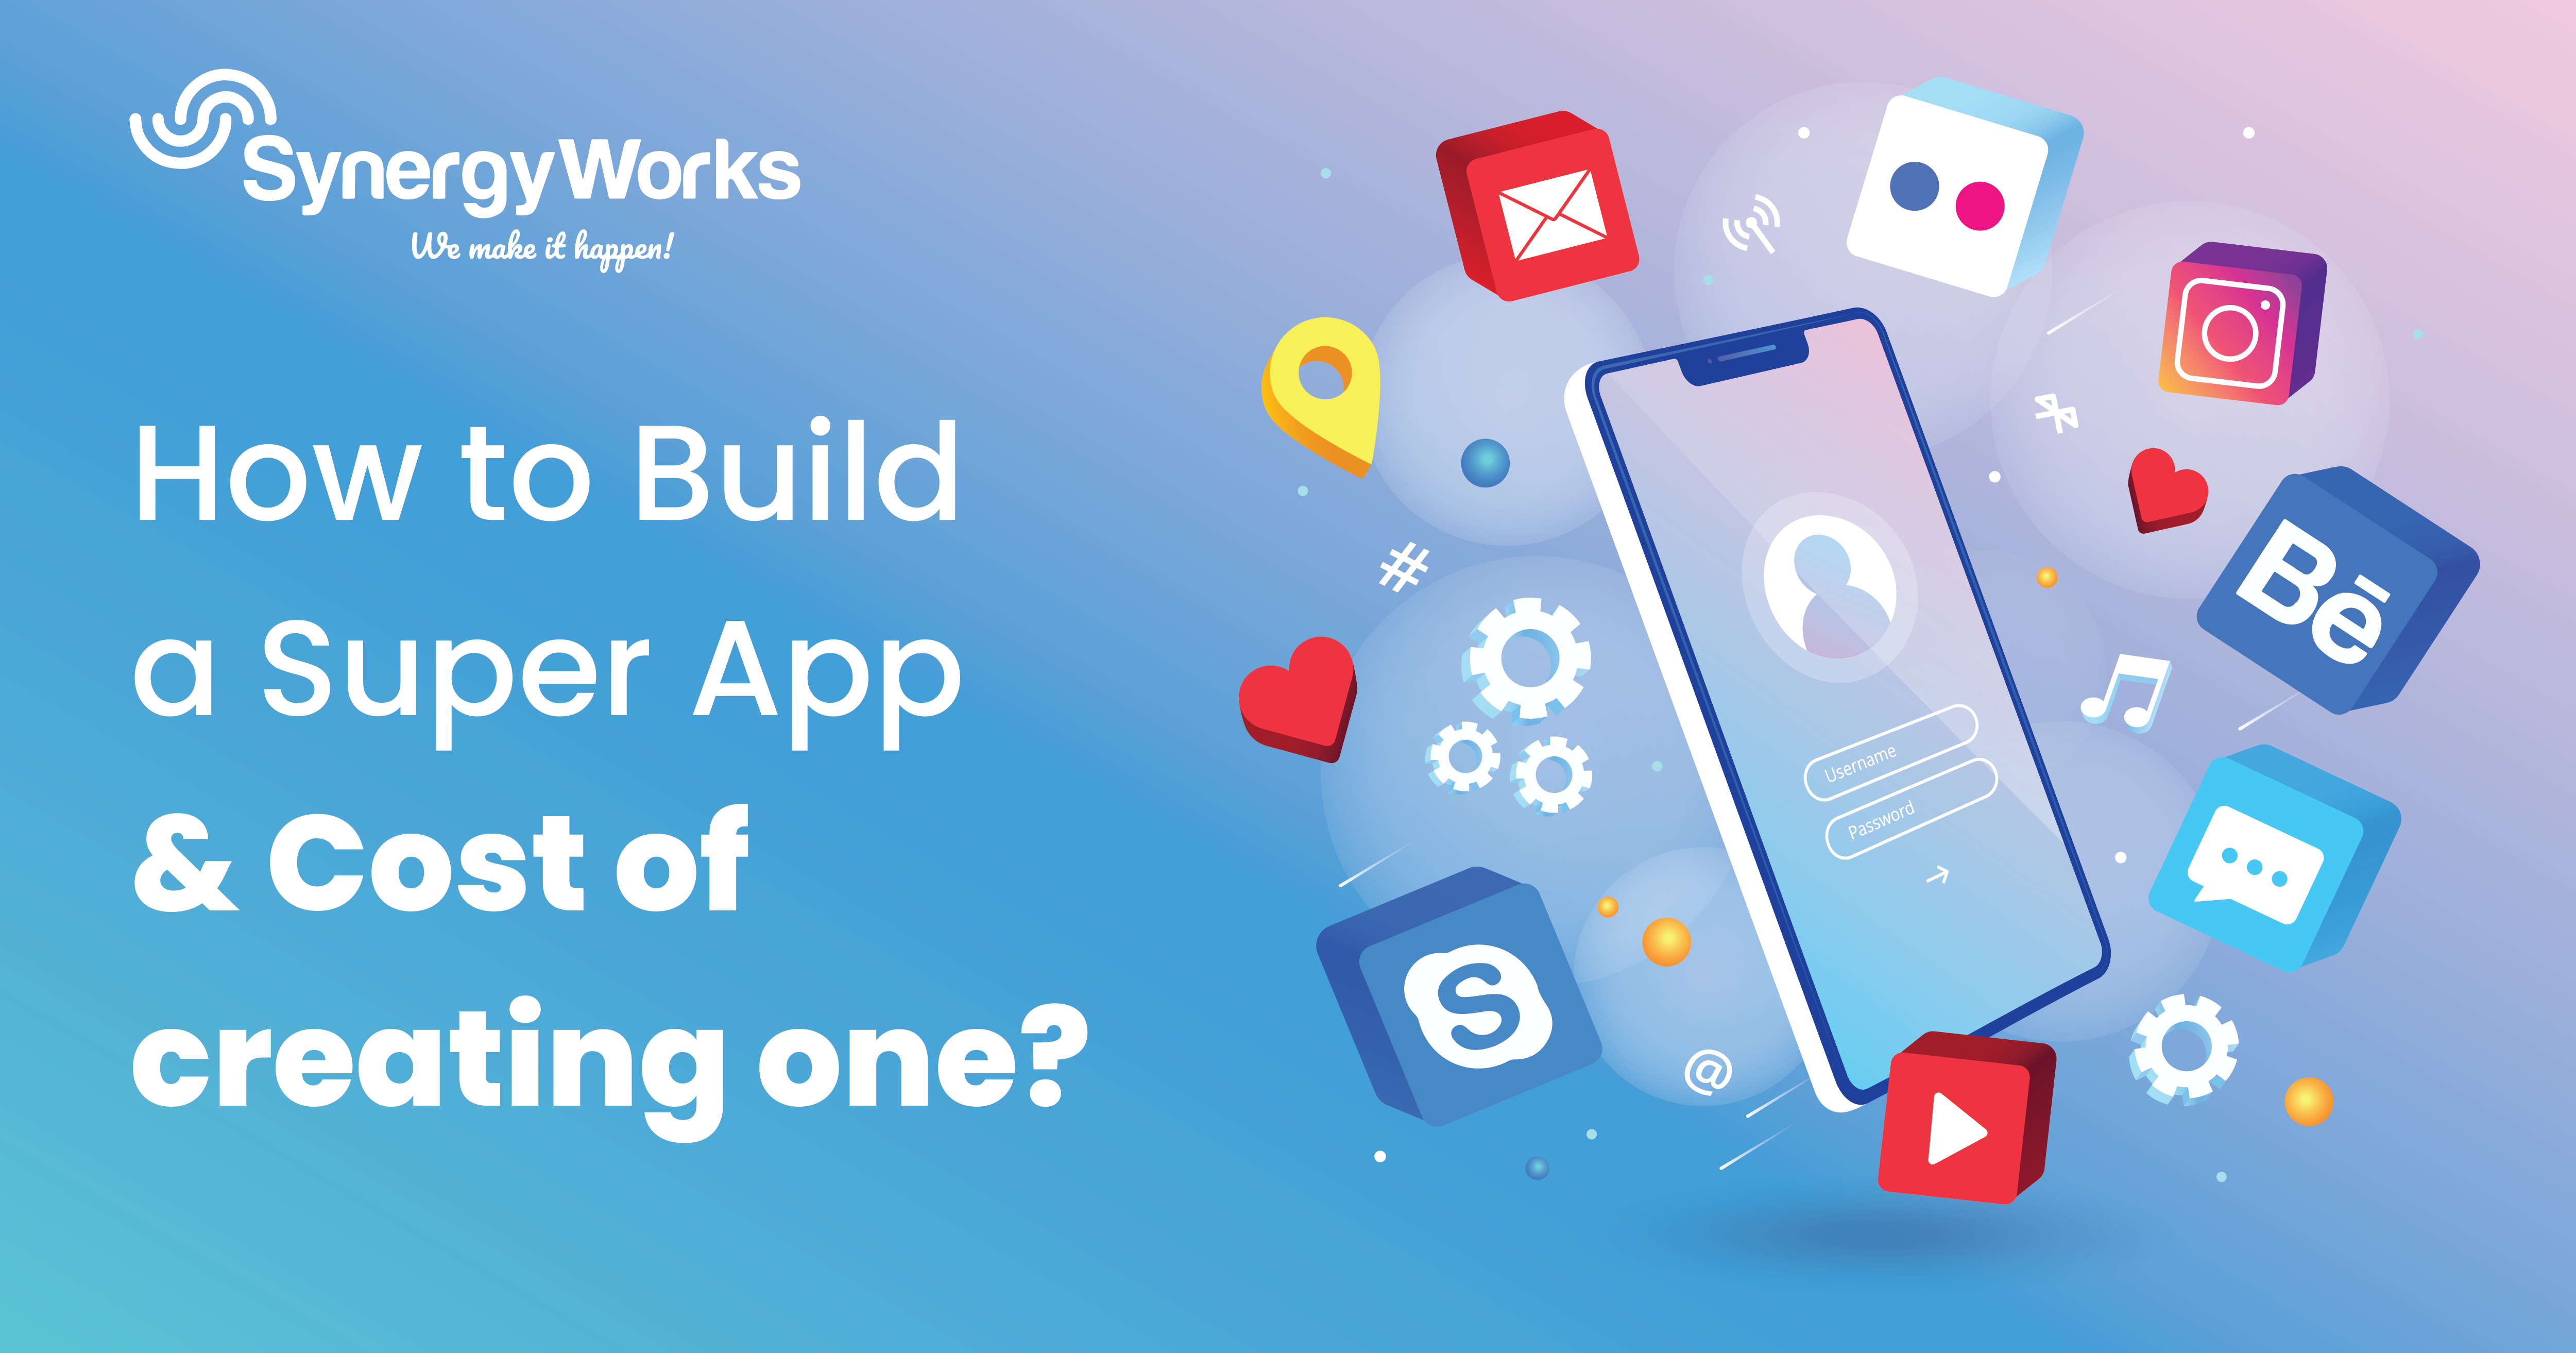 How to Build a Super App & Cost of Creating One?